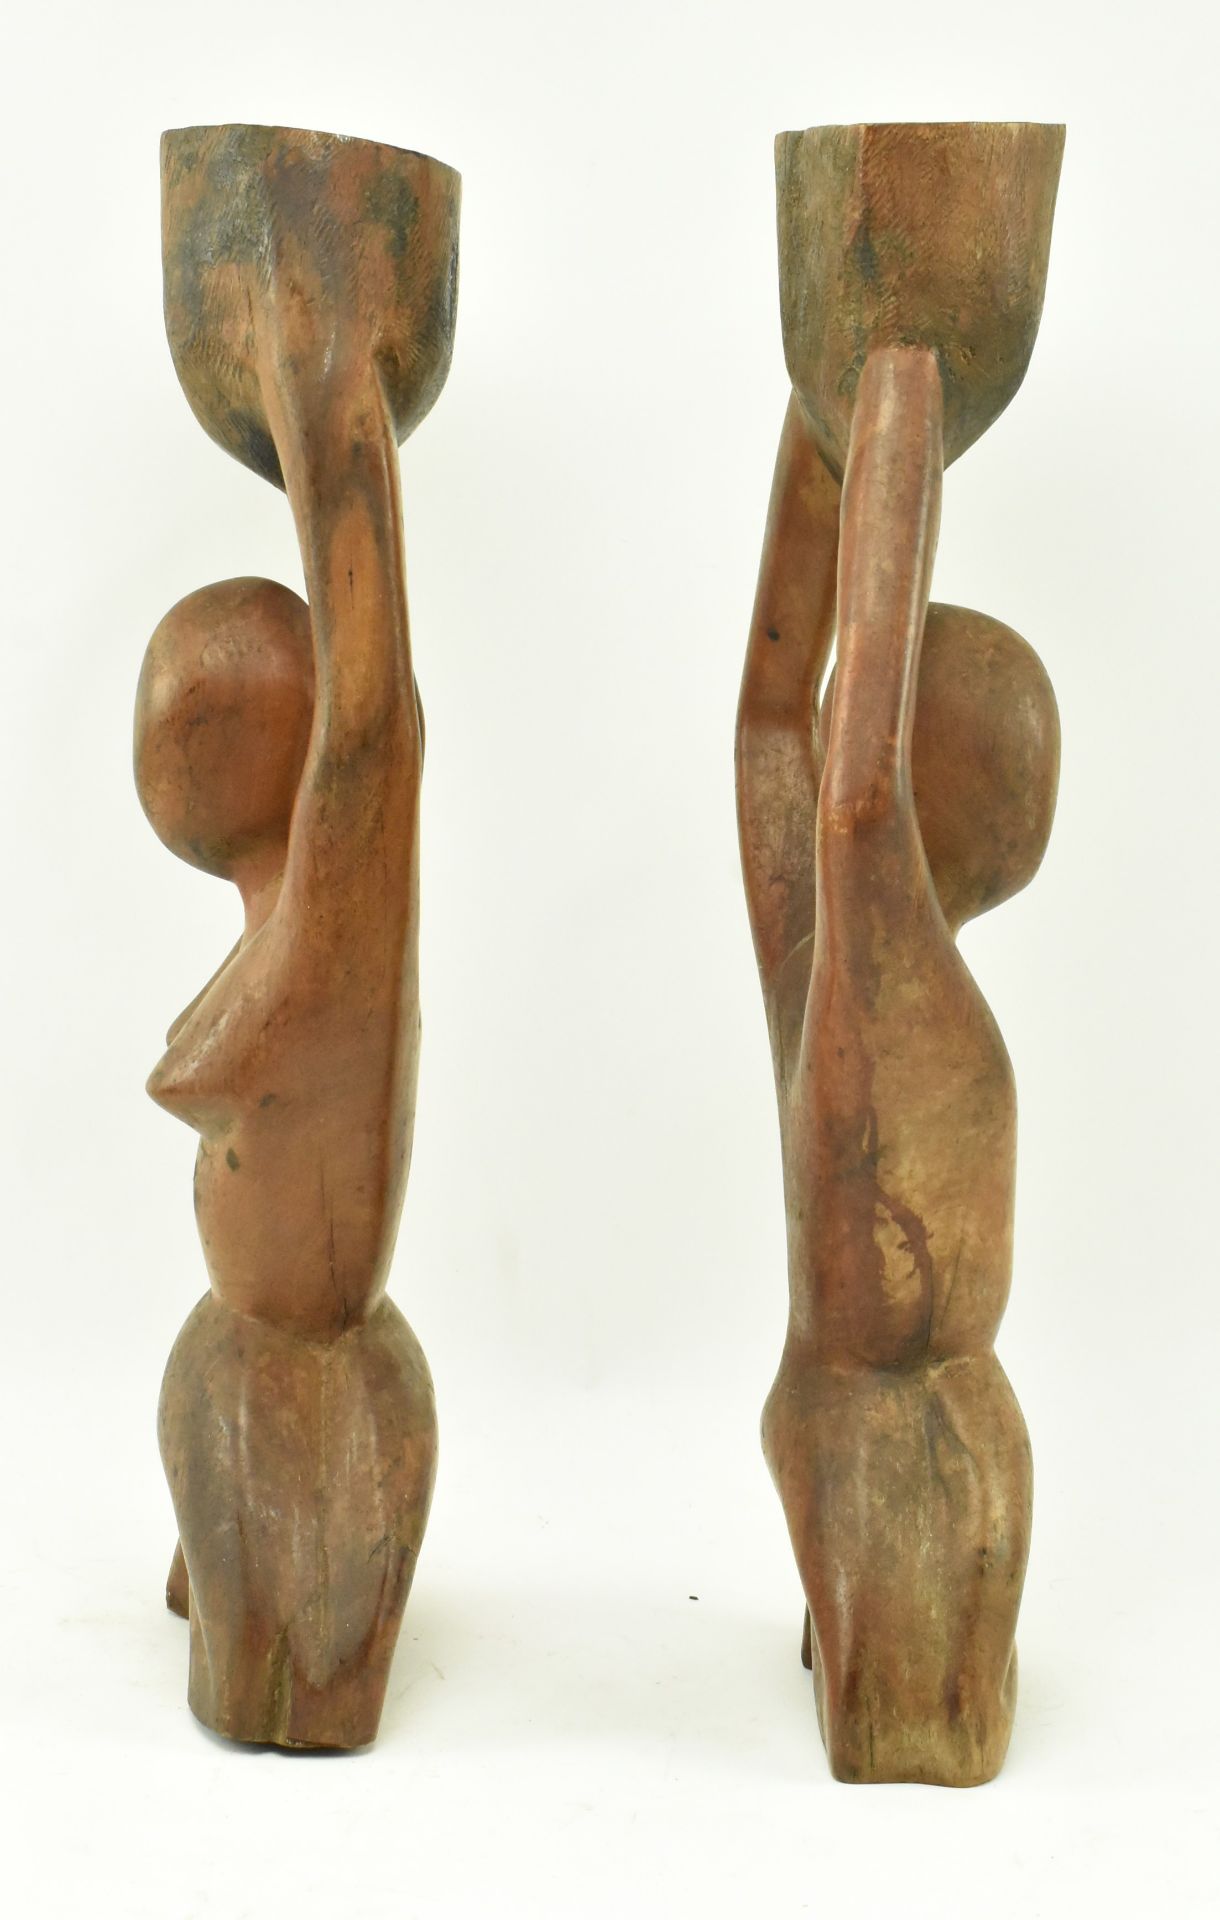 PAIR OF HAND CARVED WOOD DECORATIVE FIGURES STANDS - Image 4 of 6